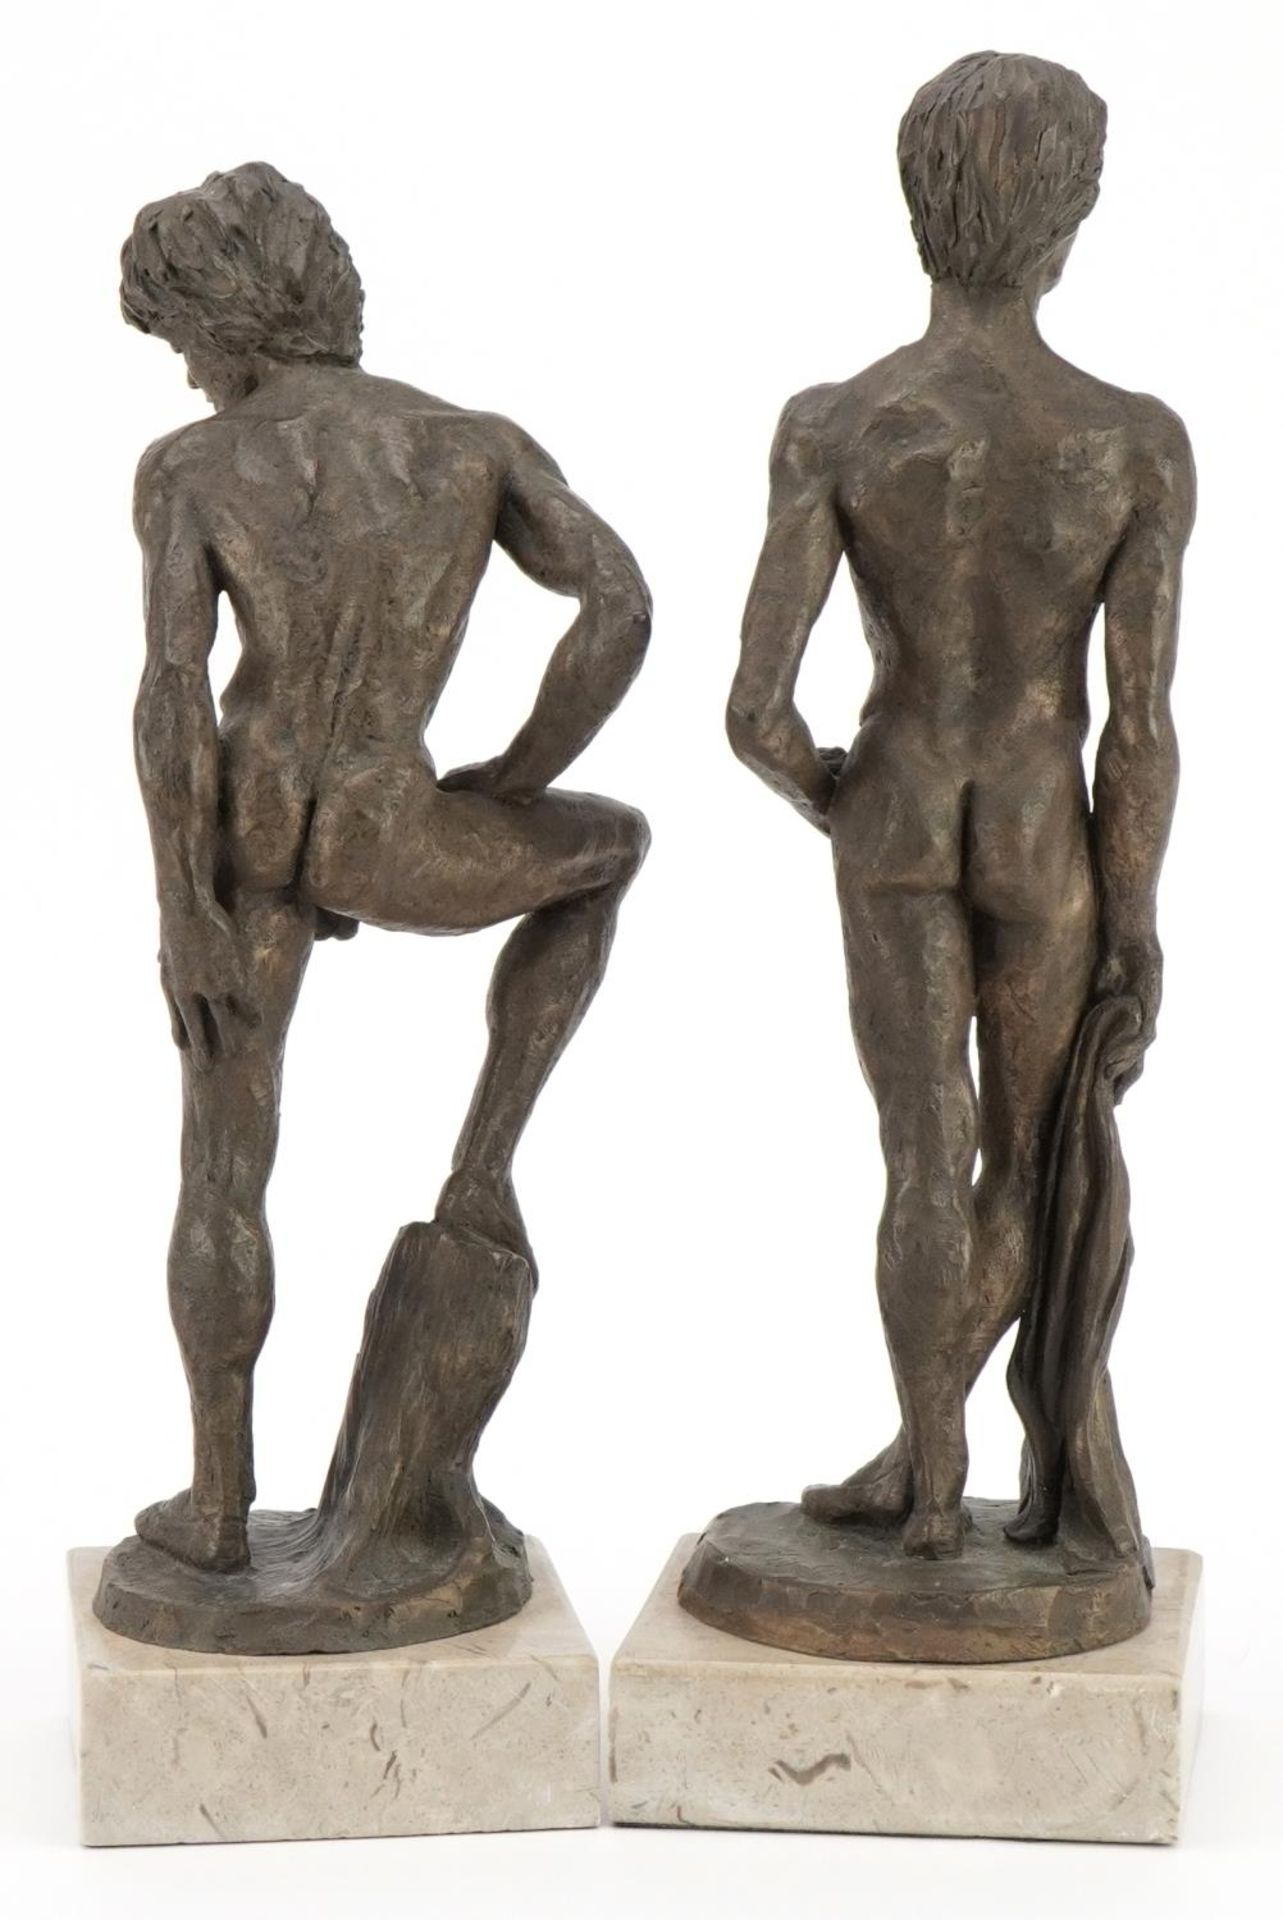 Neil Godfrey 1988, pair of contemporary cold cast bronze figures of standing nude males raised on - Image 2 of 4